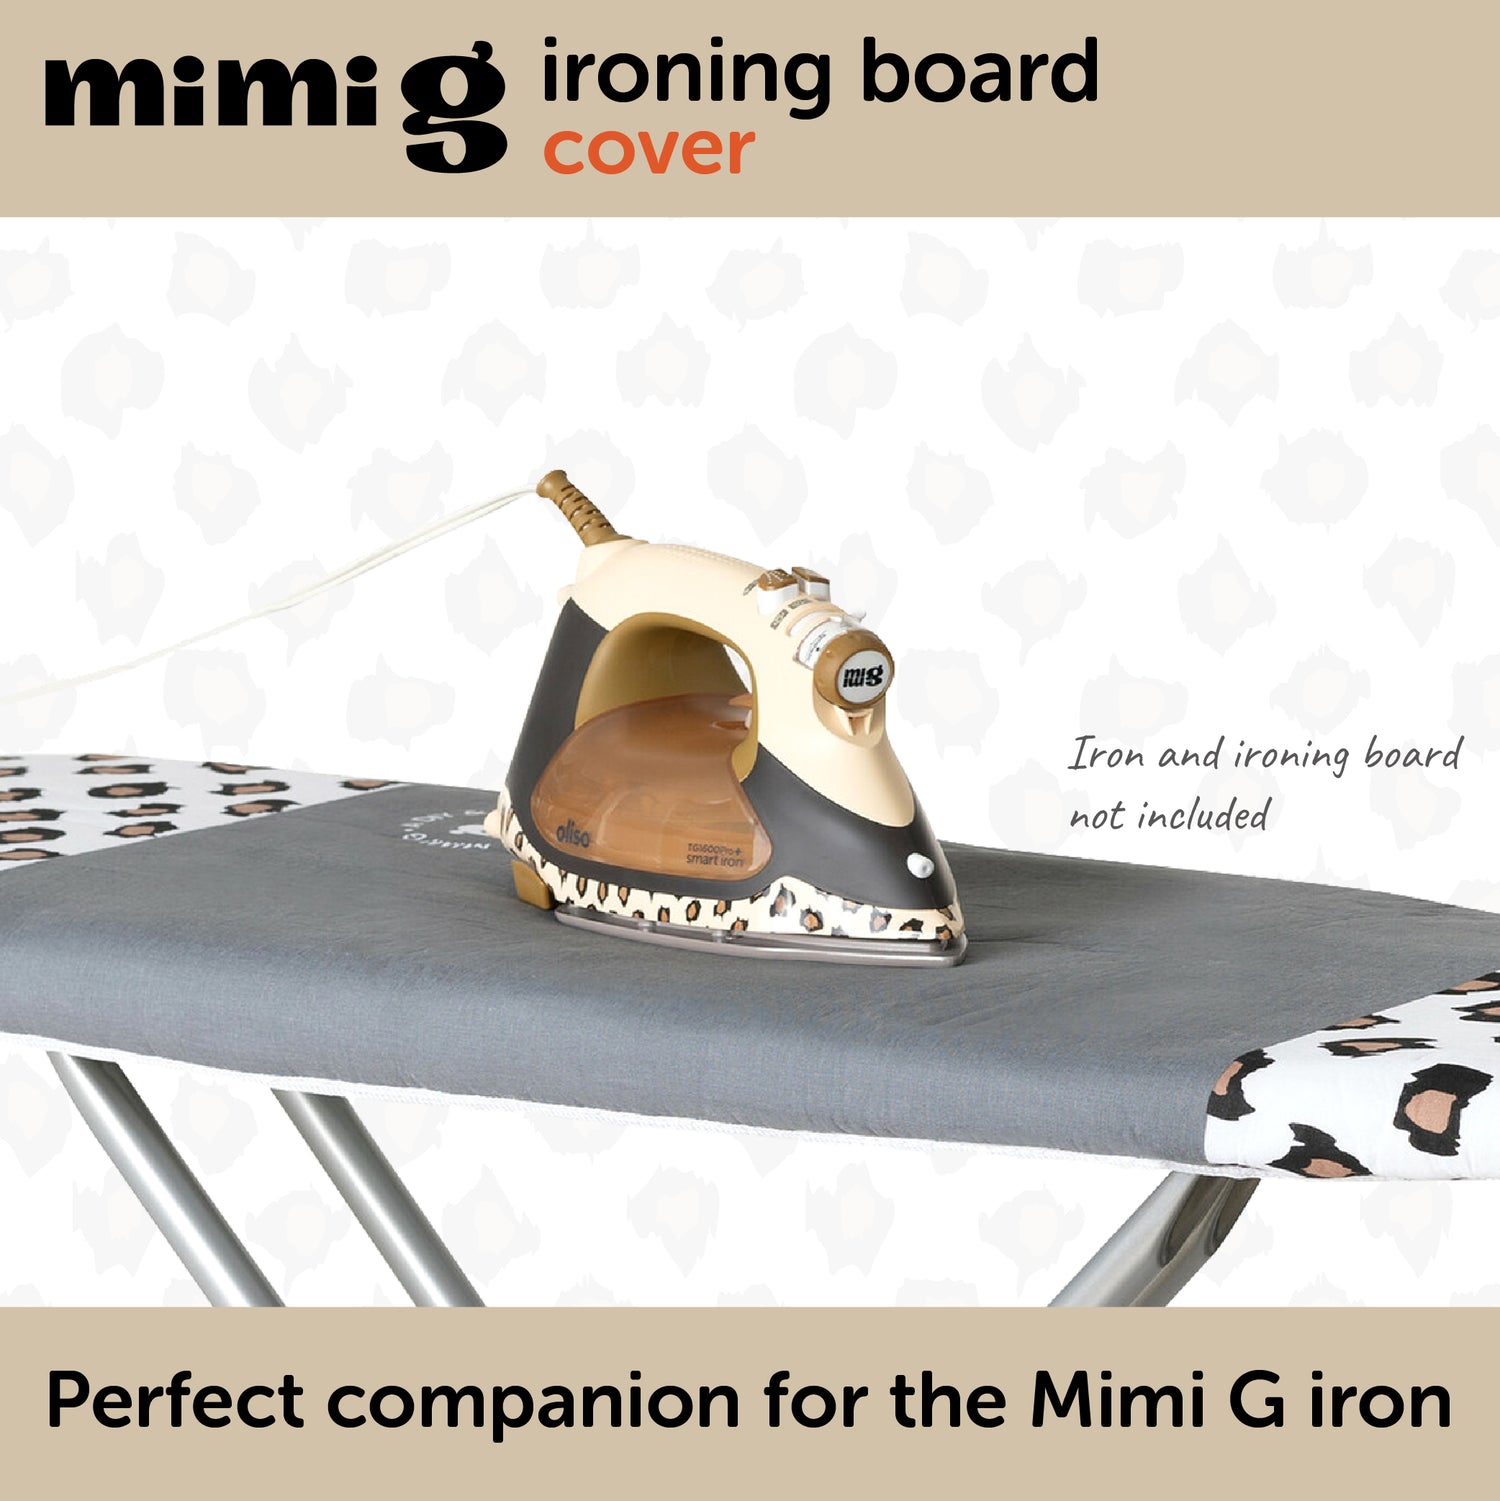 The Mimi G iron on the Mimi G ironing board cover, the perfect companions.